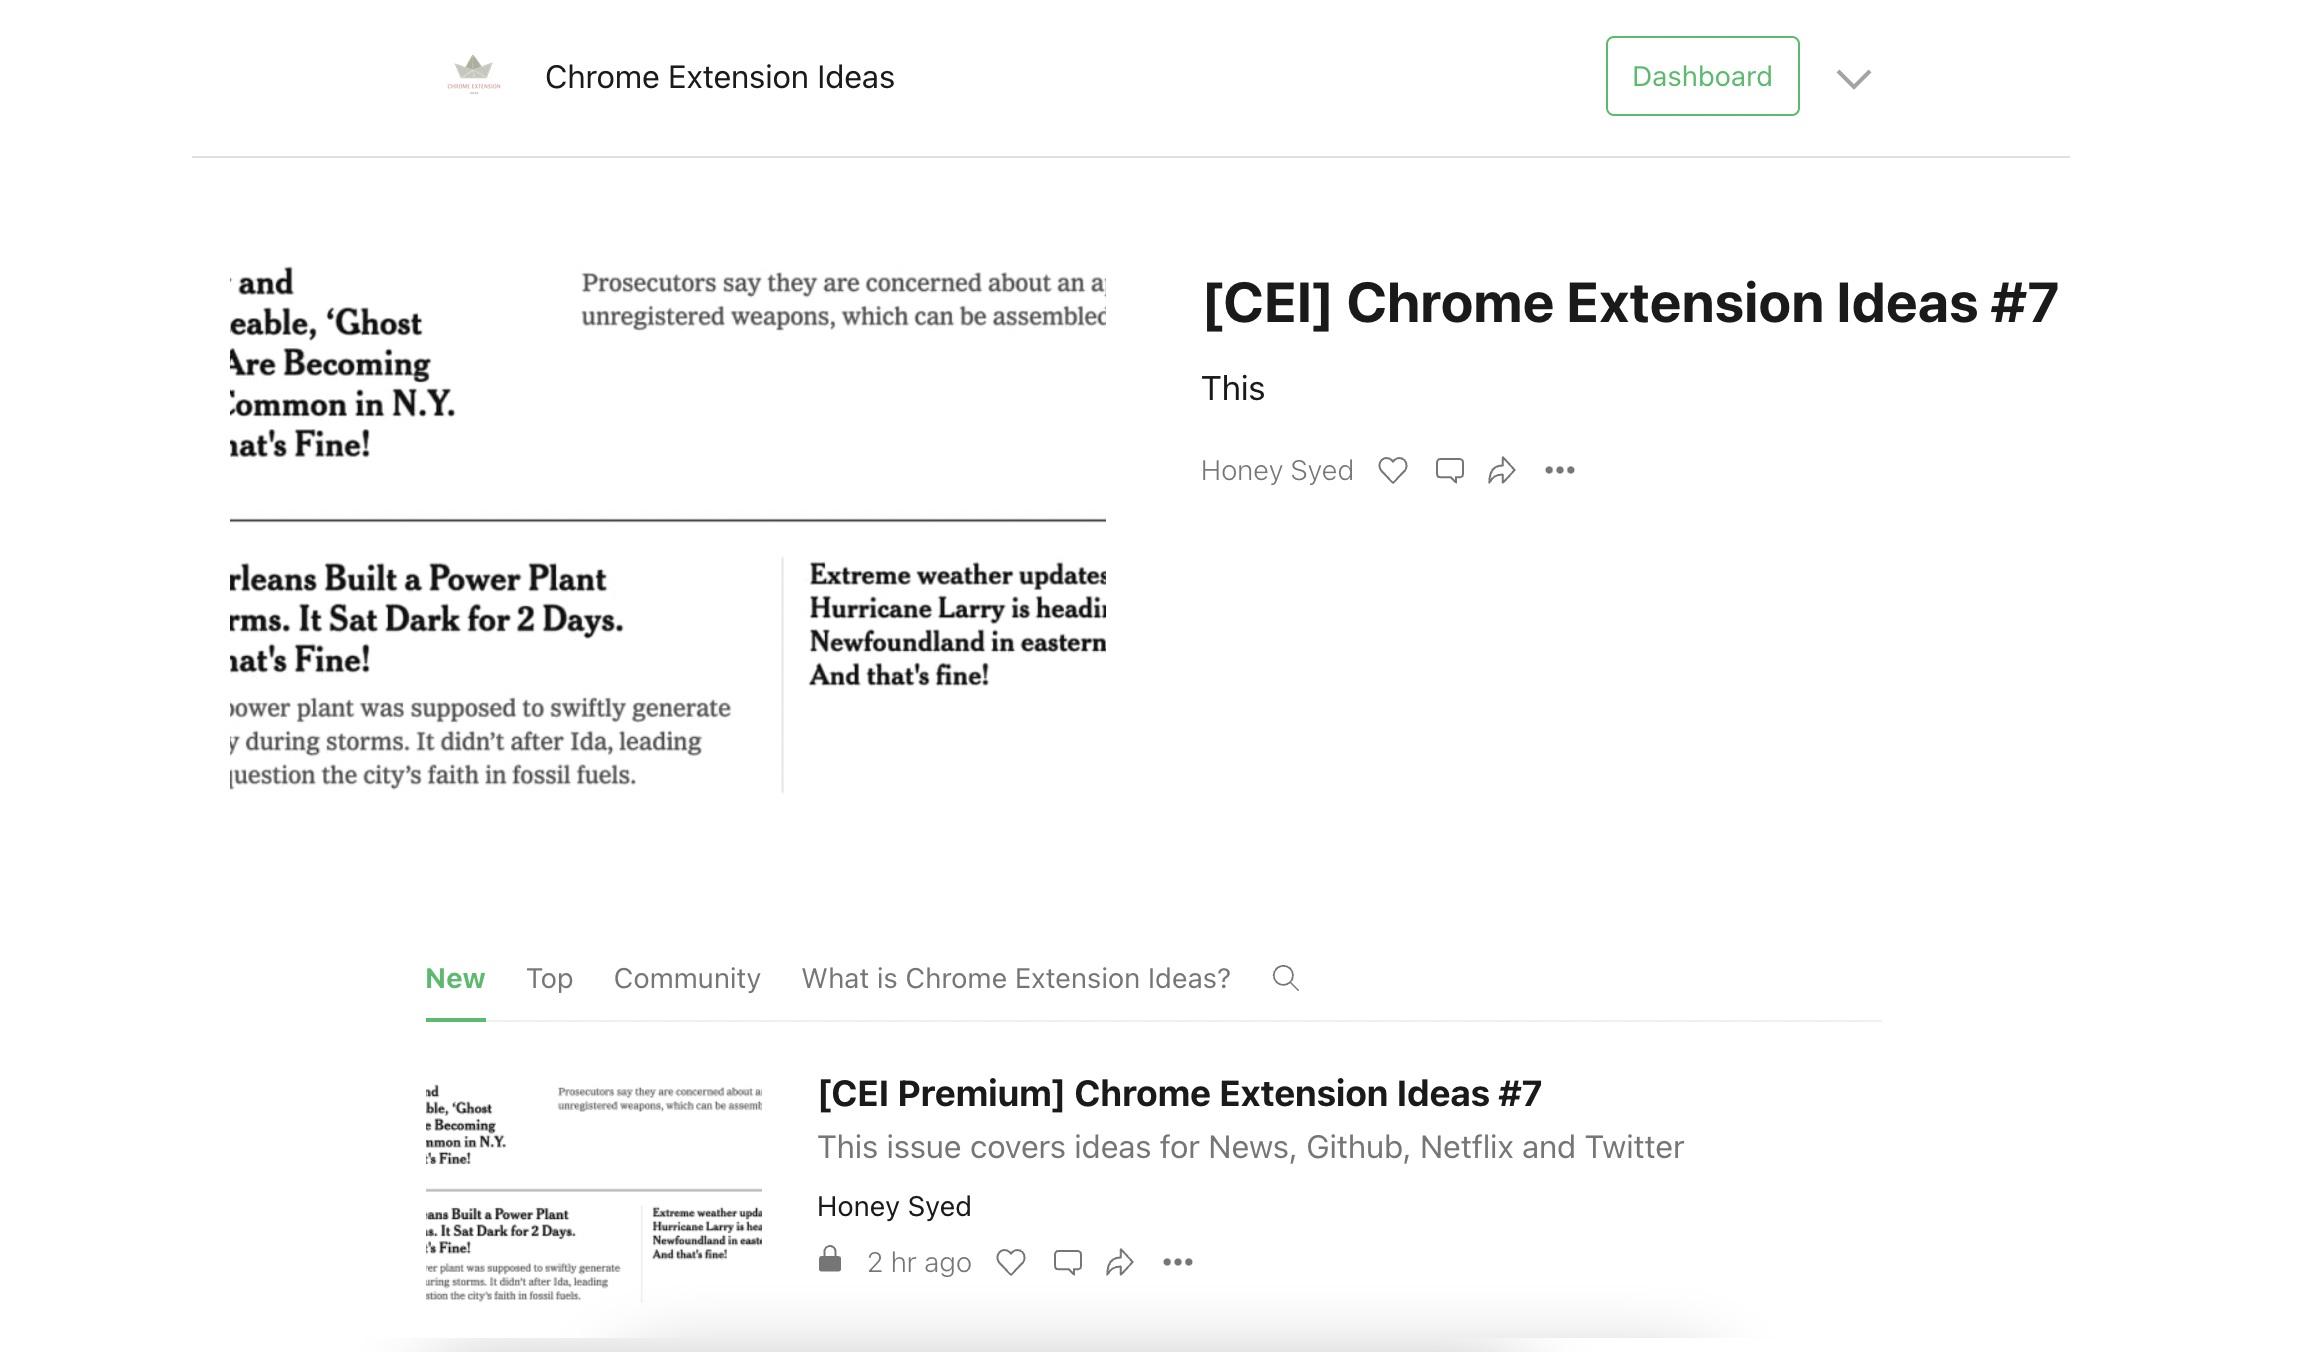 Find detailed information about Chrome Extension Ideas